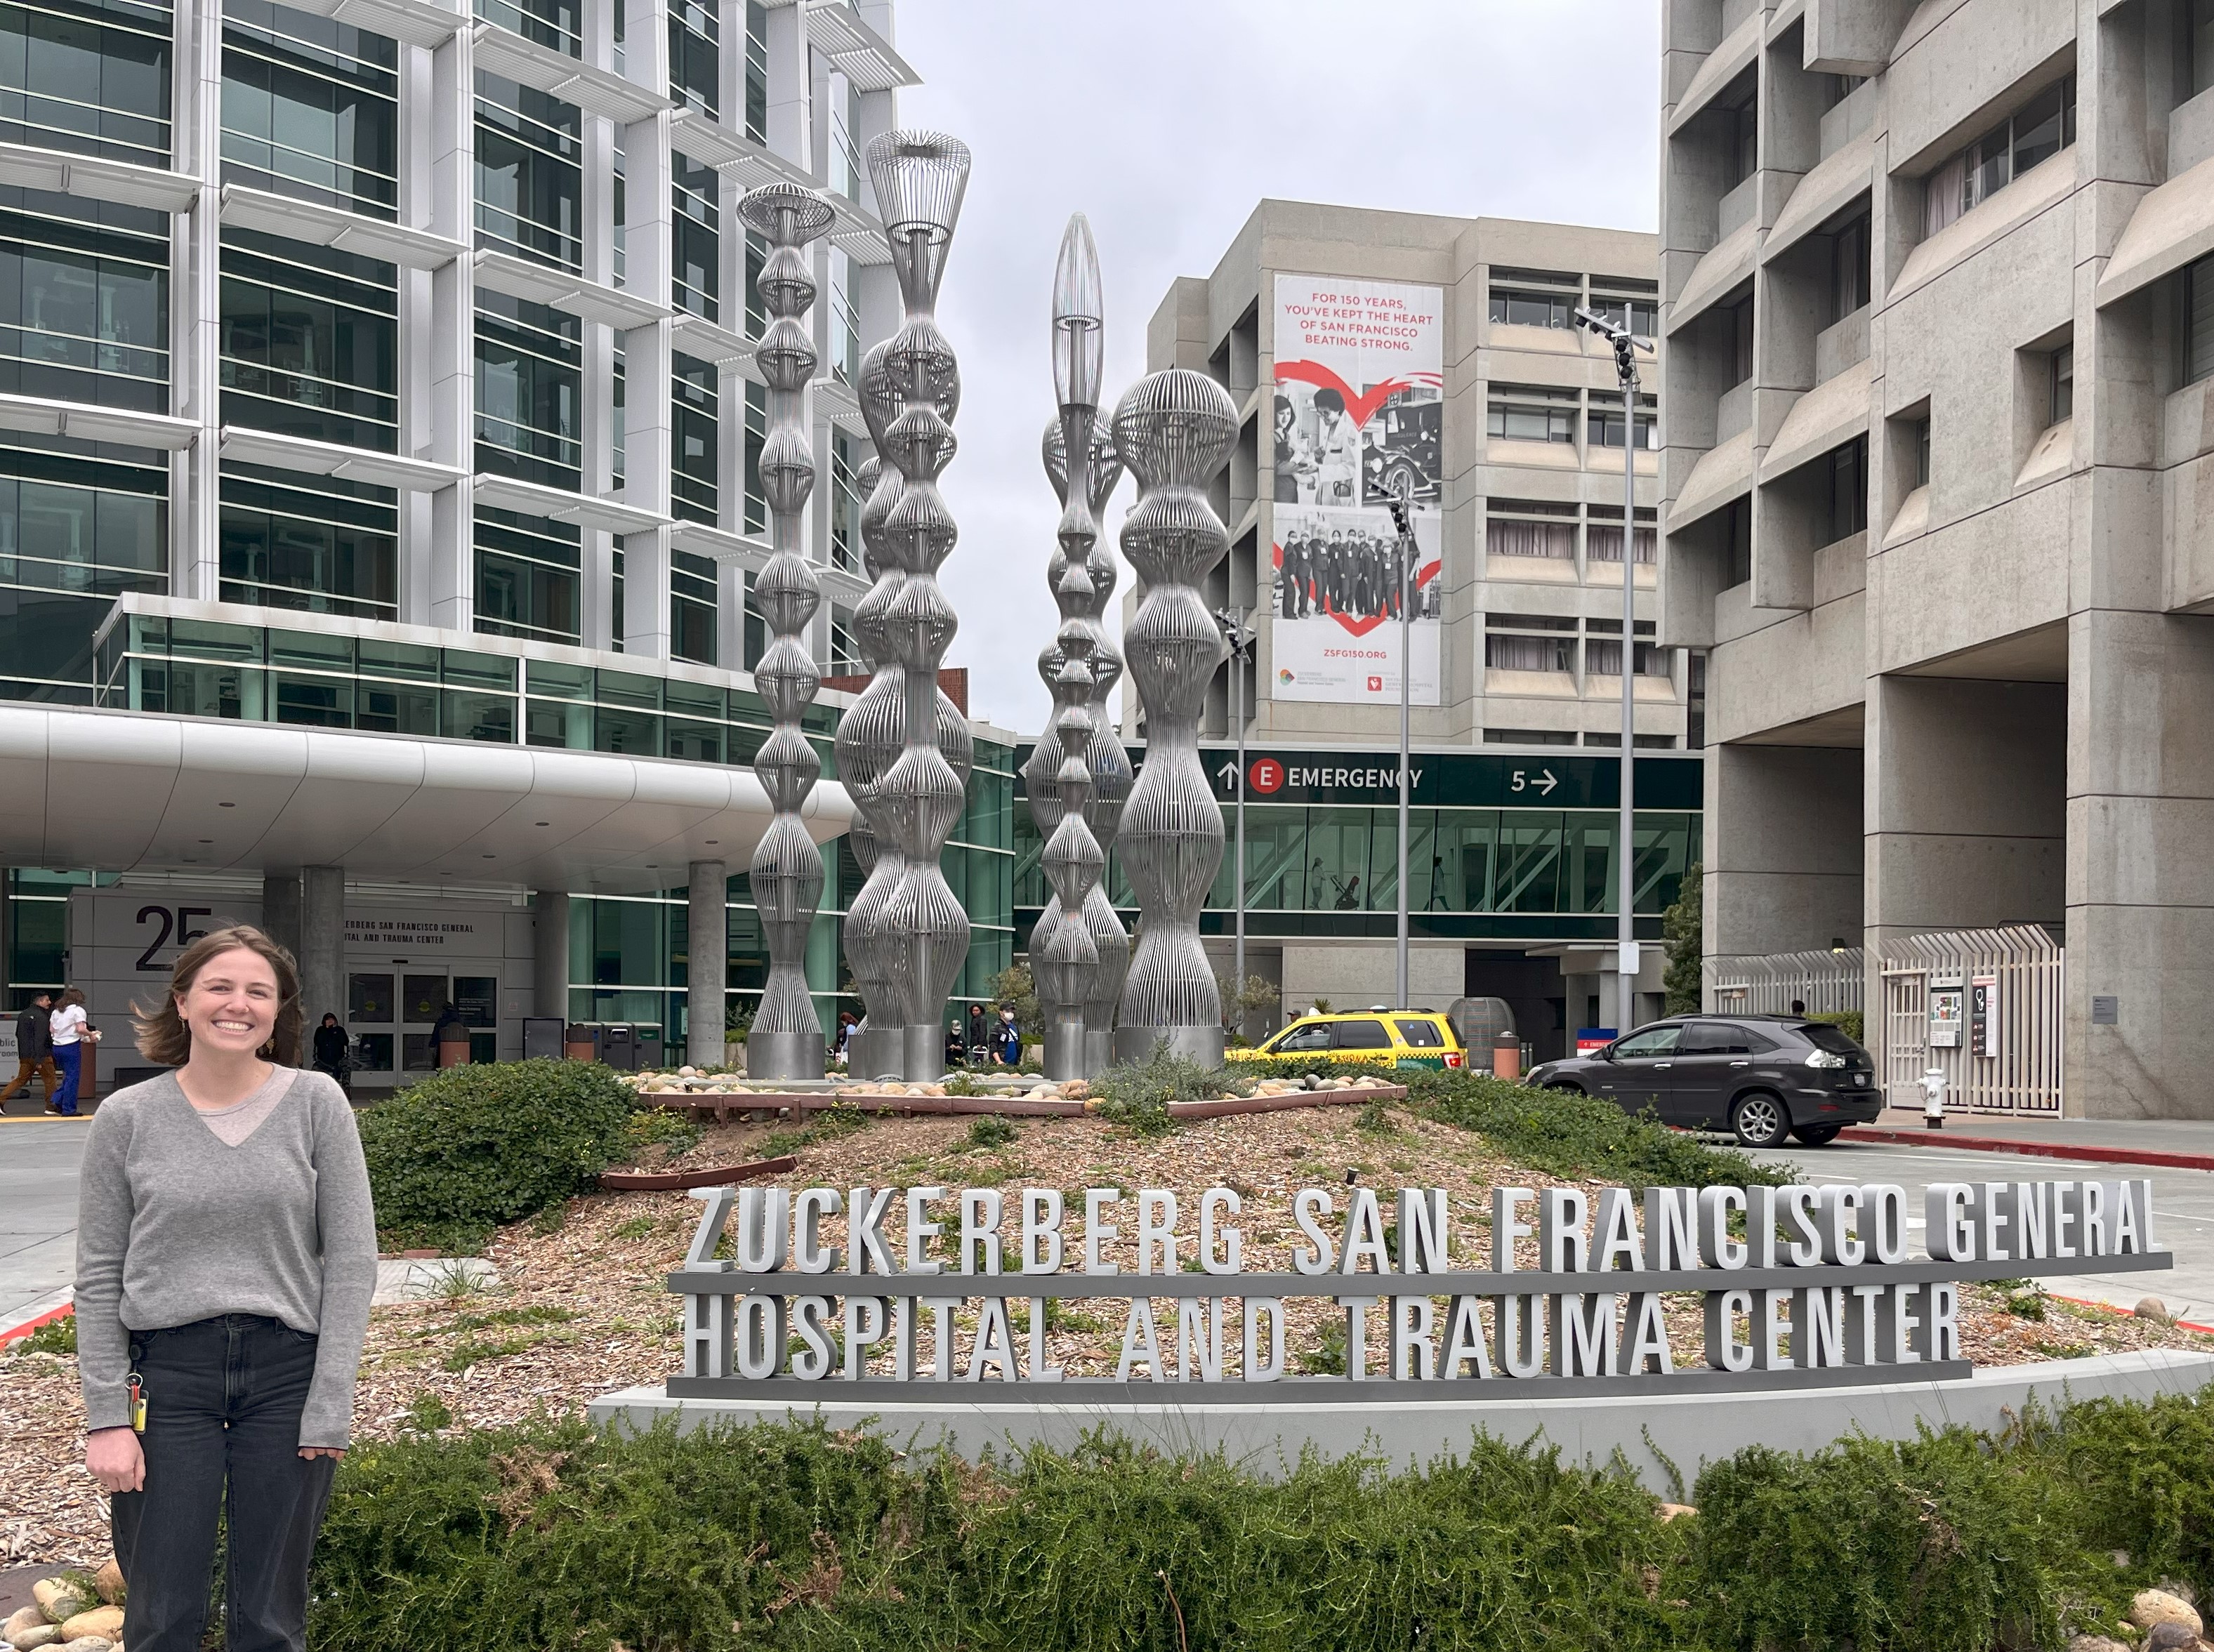 Morgan is standing next to a sign that reads Zuckerberg San Francisco General Hospital and Trauma Center.